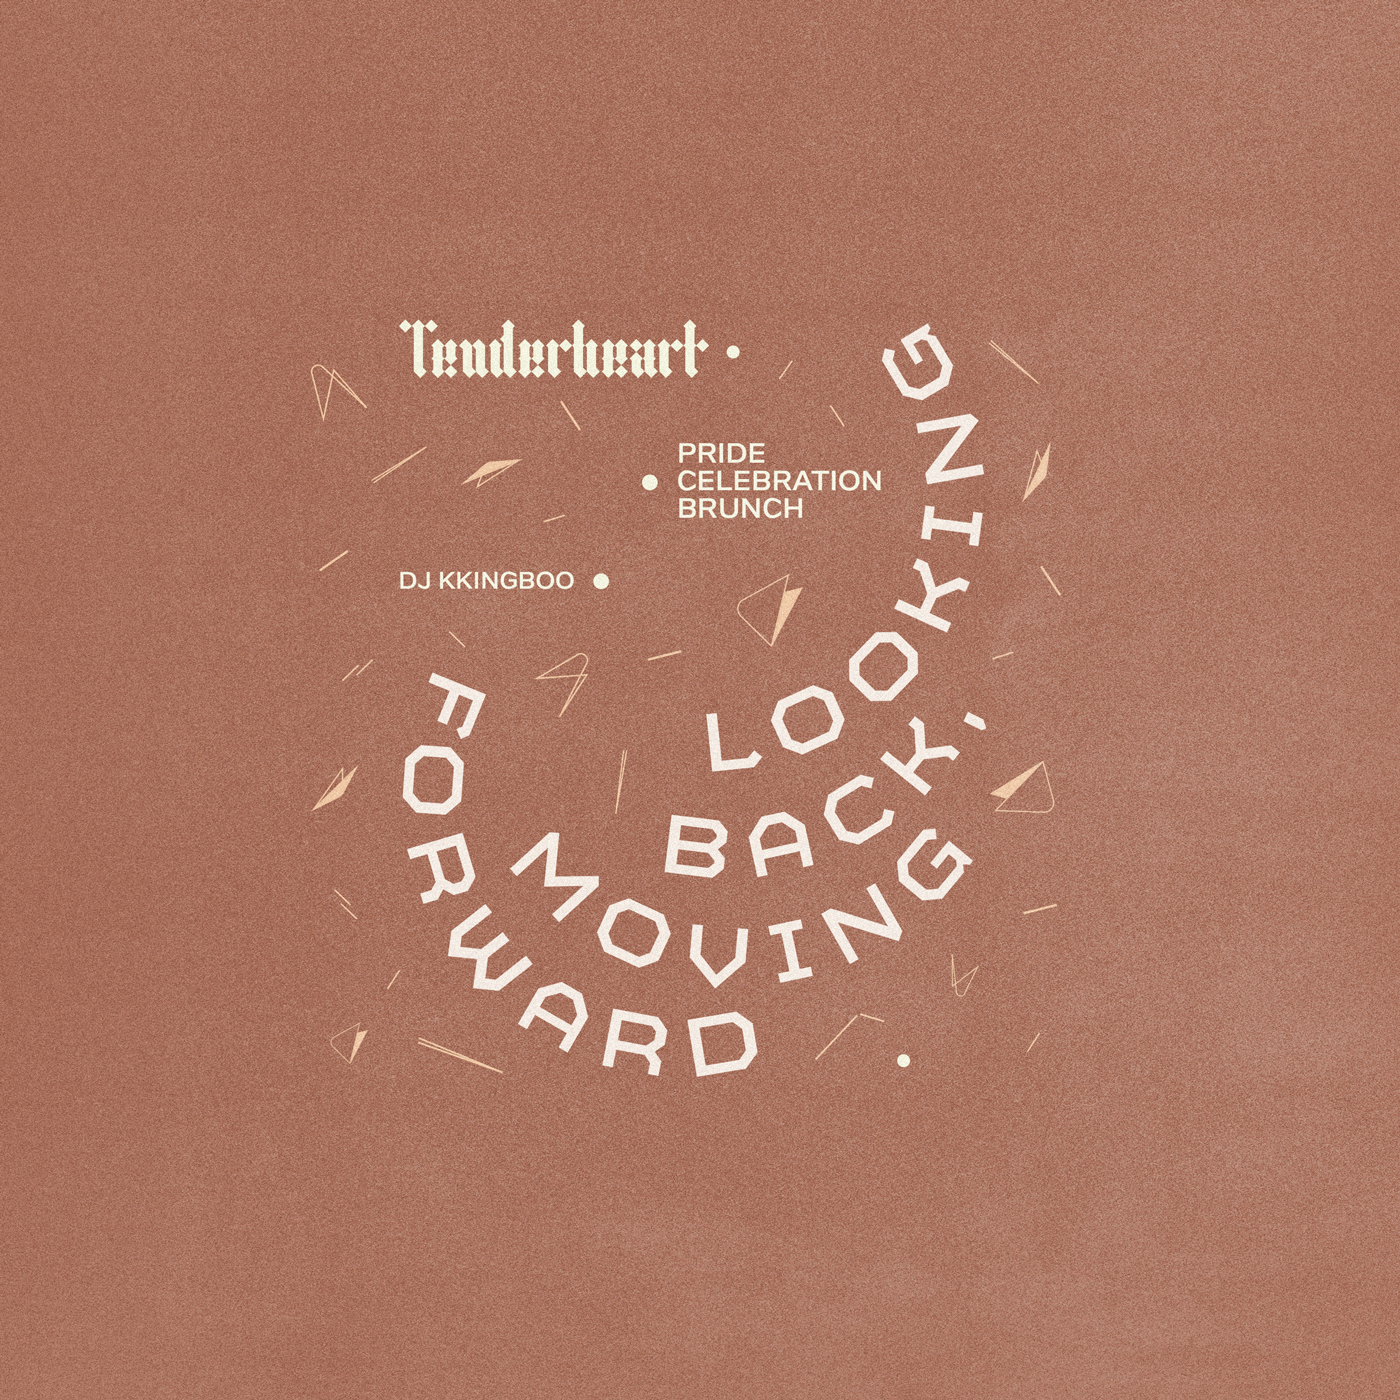 "Tenderheart" accompanied by various white text on the light brown surface.